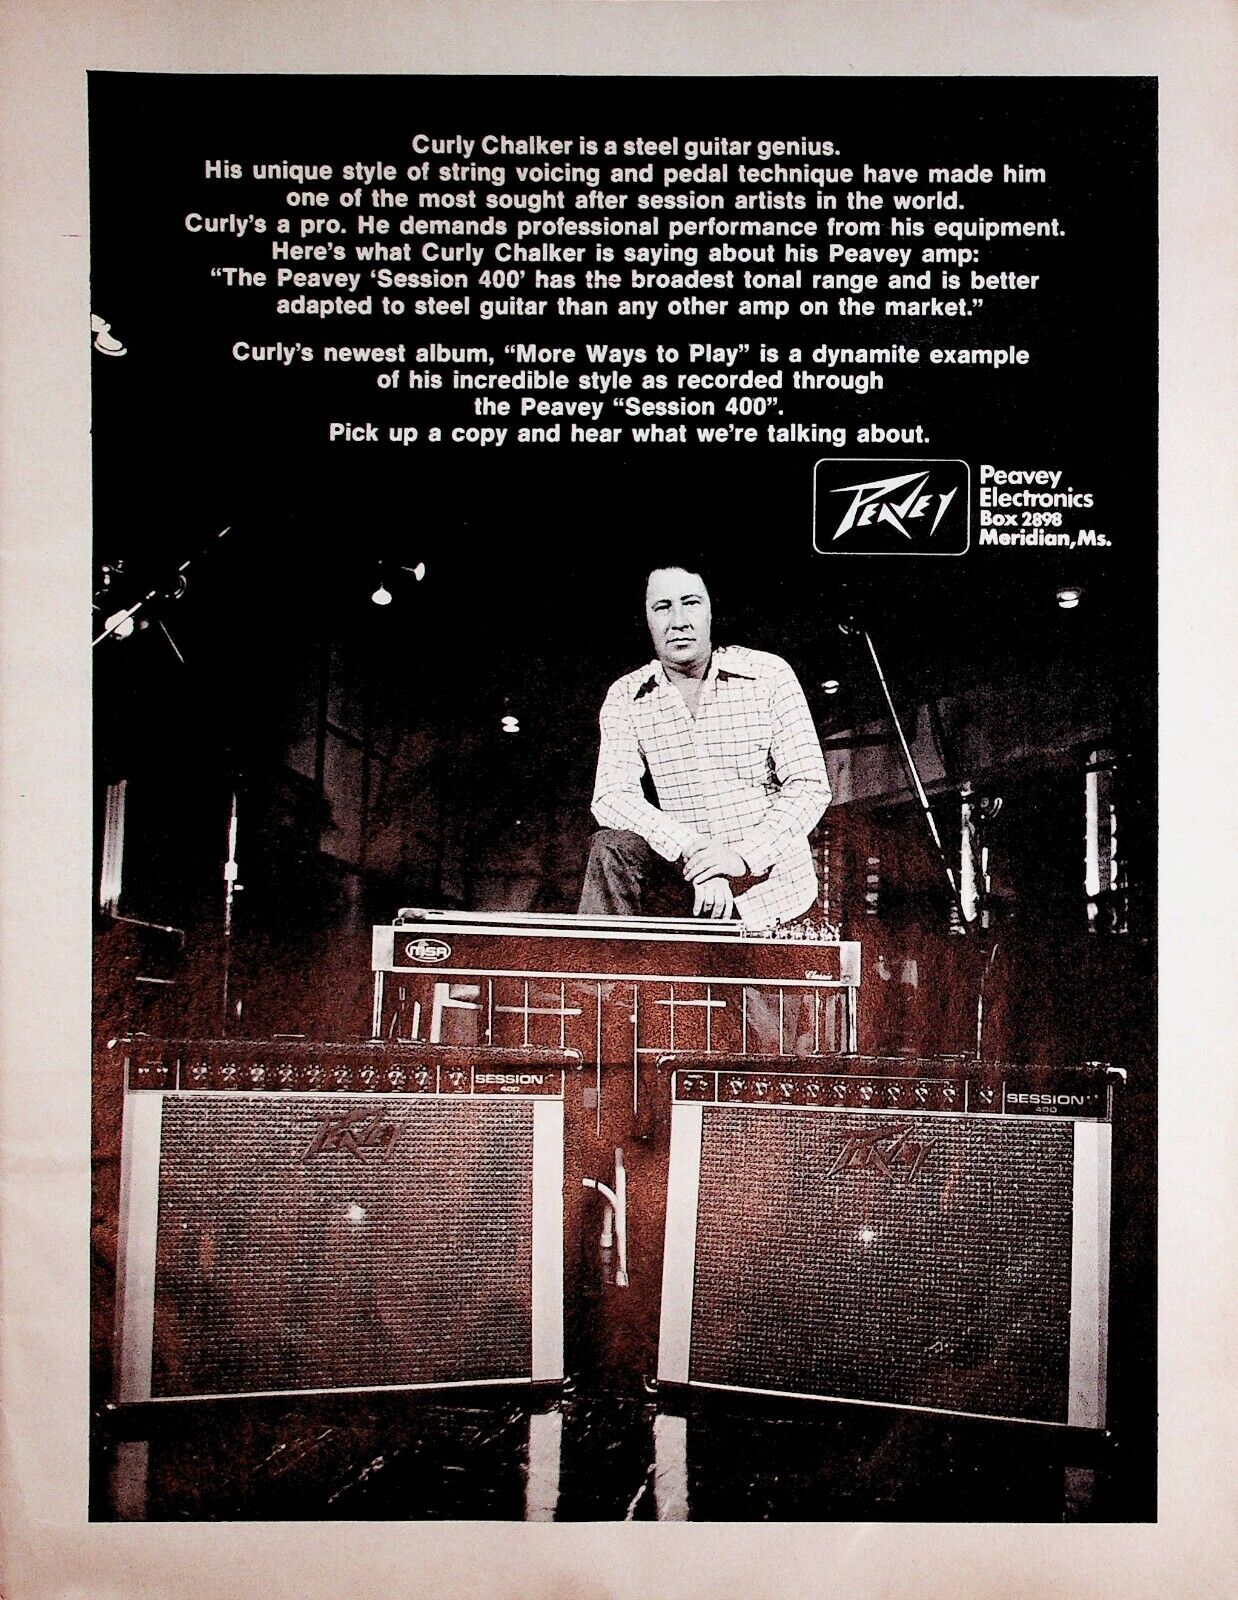 1974 Curly Chalker Steel Guitar Genius for Peavey Session 400 Amp - Vintage Ad